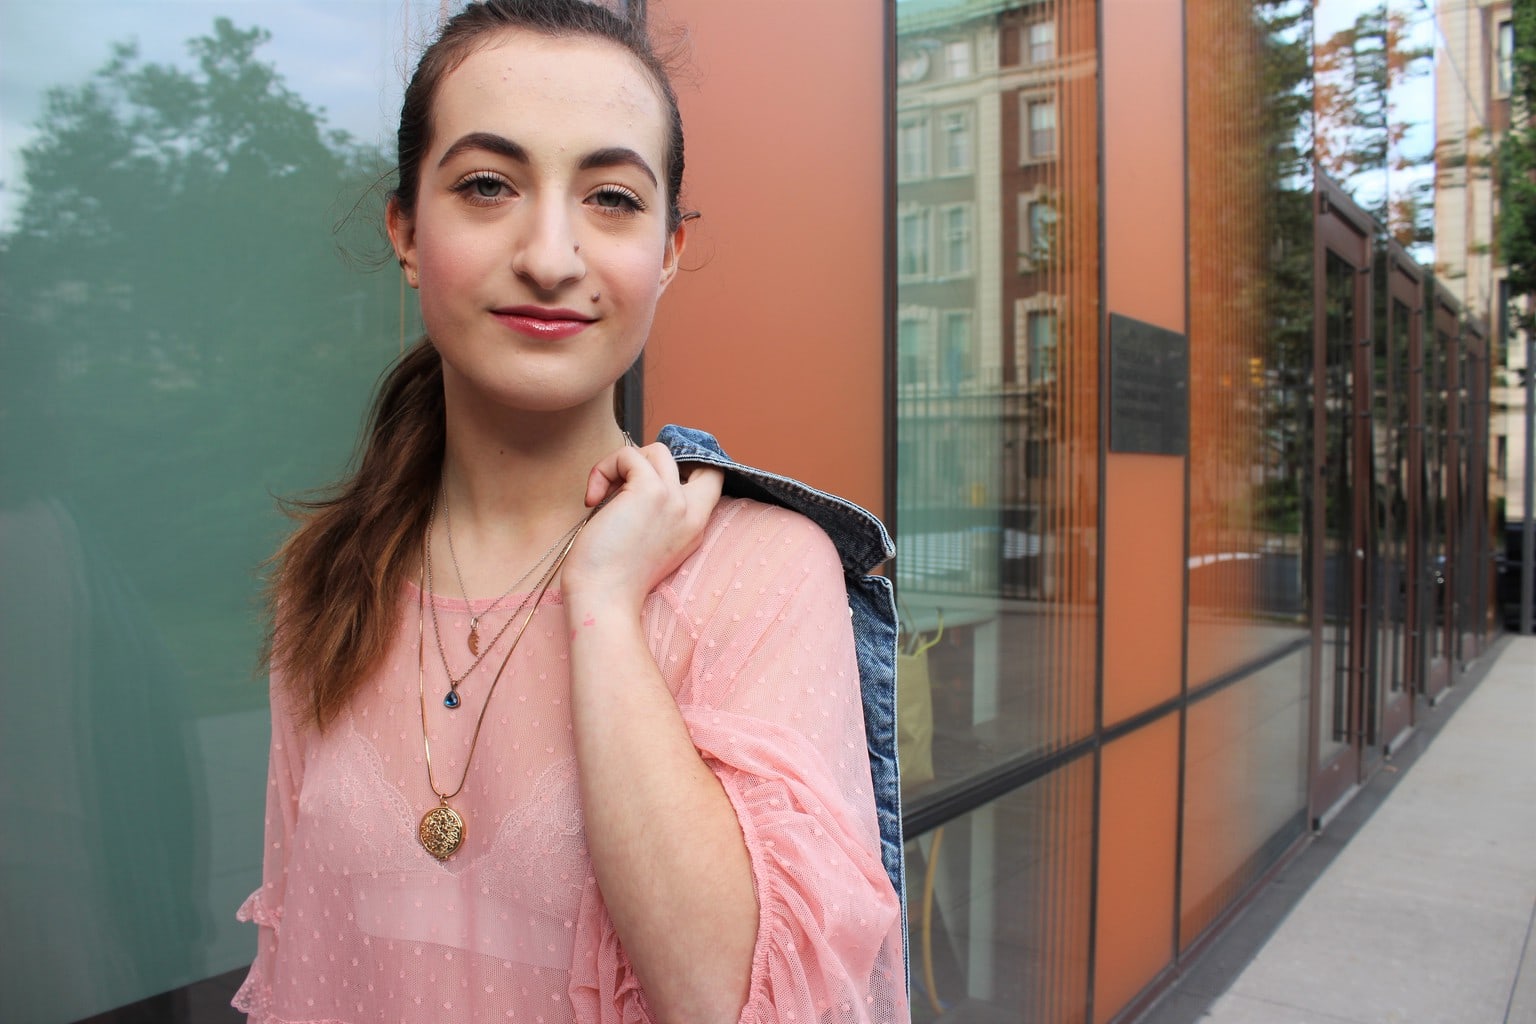 Francesca wears a sheer pink blouse with a white lace bralette underneath and accessorizes with gold layered necklaces and a light-wash denim jacket.